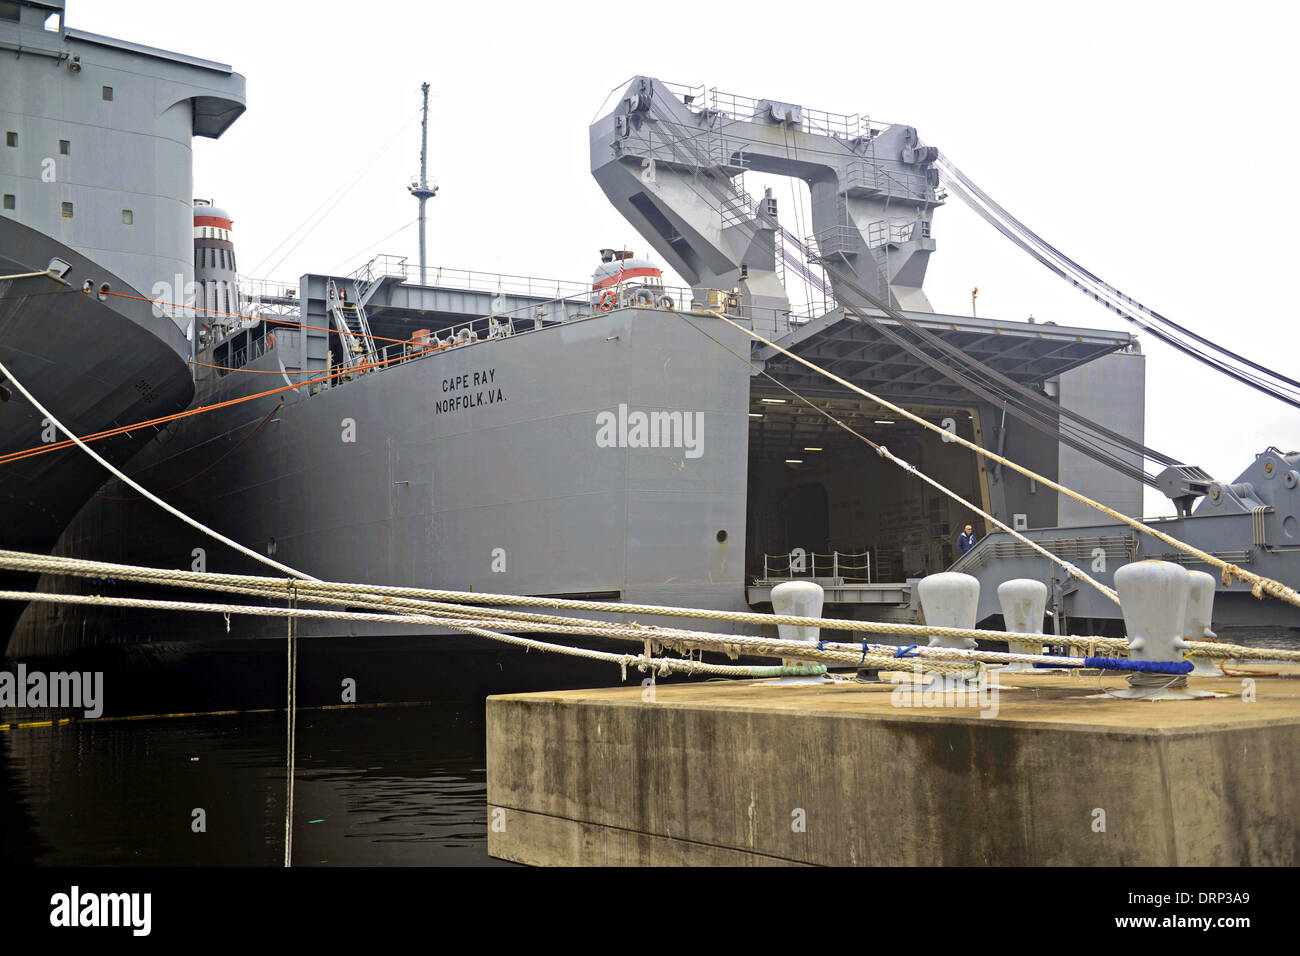 US Navy Ready Reserve Force vehicle transport ship Cape Ray docked at Norfolk Naval Shipyard before departing to Italy to begin processing Syrian chemical weapons January 2, 2014 in Portsmouth, Virginia. The Cape Ray has been fitted with equipment to destroy Syrian Chemical weapons at sea as part of a U.N. agreement. Stock Photo